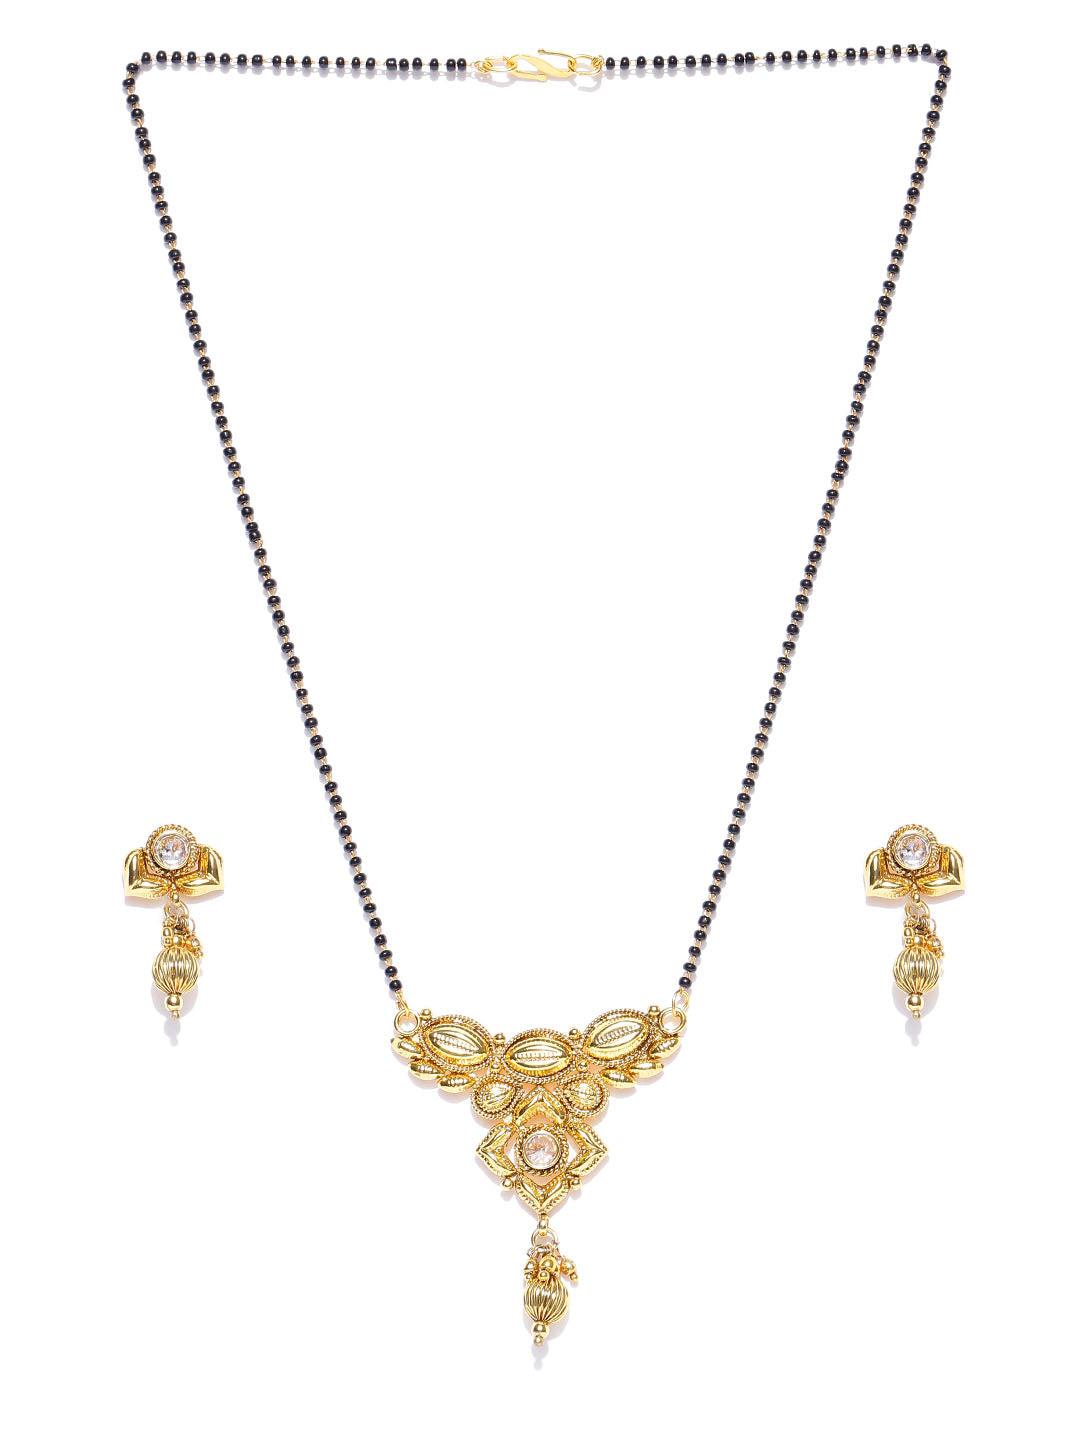 Gold Plated Kundan Polki Mangalsutra With Earrings Set For Women